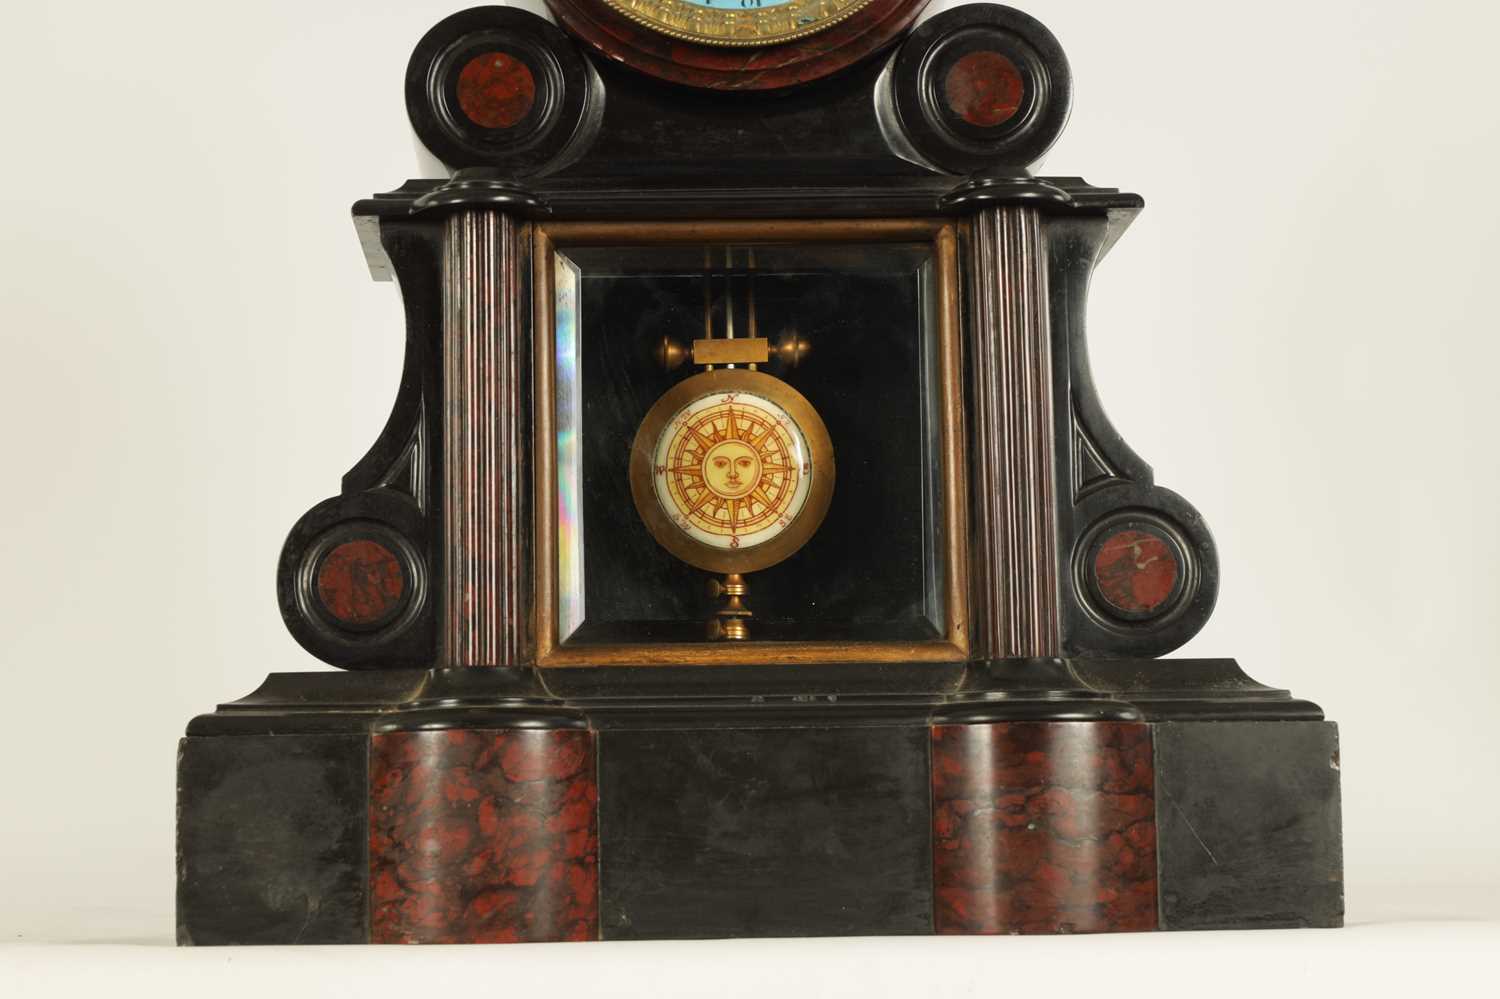 A RARE LATE 19TH CENTURY FRENCH BLACK AND ROUGE MARBLE 'WORLD TIME' MANTEL CLOCK - Image 6 of 13